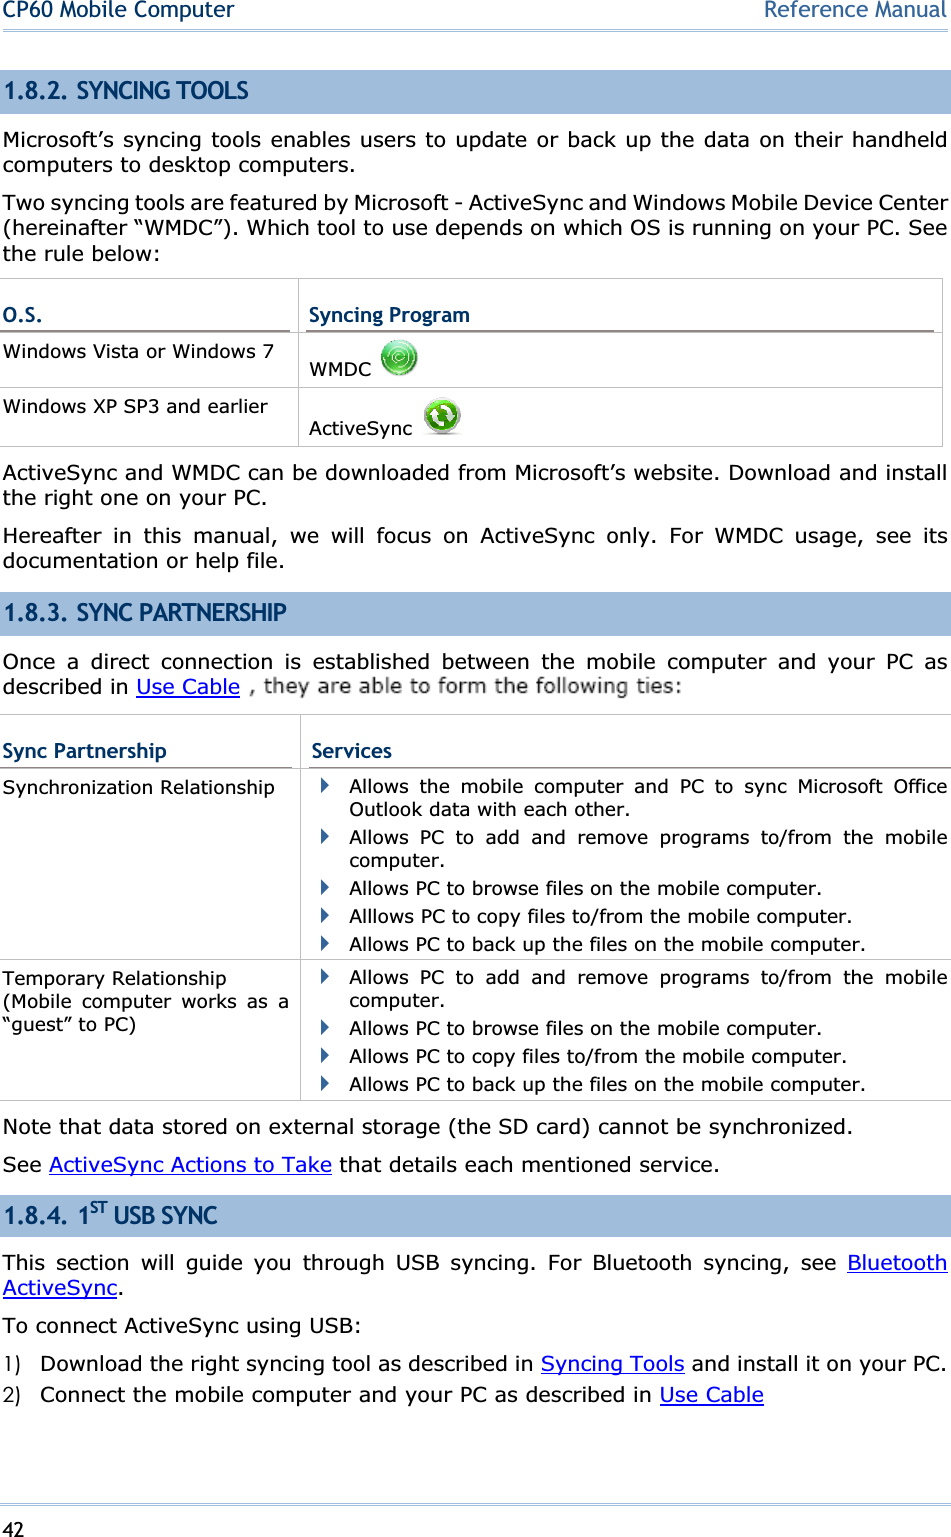 42CP60 Mobile Computer Reference Manual1.8.2. SYNCING TOOLS Microsoft’s syncing tools enables users to update or back up the data on their handheld computers to desktop computers. Two syncing tools are featured by Microsoft - ActiveSync and Windows Mobile Device Center (hereinafter “WMDC”). Which tool to use depends on which OS is running on your PC. See the rule below: O.S.  Syncing Program Windows Vista or Windows 7  WMDCWindows XP SP3 and earlier ActiveSyncActiveSync and WMDC can be downloaded from Microsoft’s website. Download and install the right one on your PC. Hereafter in this manual, we will focus on ActiveSync only. For WMDC usage, see its documentation or help file. 1.8.3. SYNC PARTNERSHIP Once a direct connection is established between the mobile computer and your PC as described in Use Cable or  ᙑᎄ!ބլࠩ೶ᅃࠐᄭΖ, they are able to form the following ties: Sync Partnership  ServicesSynchronization Relationship  Allows the mobile computer and PC to sync Microsoft Office Outlook data with each other. Allows PC to add and remove programs to/from the mobile computer.Allows PC to browse files on the mobile computer. Alllows PC to copy files to/from the mobile computer. Allows PC to back up the files on the mobile computer. Temporary Relationship (Mobile computer works as a “guest” to PC) Allows PC to add and remove programs to/from the mobile computer.Allows PC to browse files on the mobile computer. Allows PC to copy files to/from the mobile computer. Allows PC to back up the files on the mobile computer. Note that data stored on external storage (the SD card) cannot be synchronized. See ActiveSync Actions to Take that details each mentioned service. 1.8.4. 1ST USB SYNC This section will guide you through USB syncing. For Bluetooth syncing, see Bluetooth ActiveSync.To connect ActiveSync using USB: 1) Download the right syncing tool as described in Syncing Tools and install it on your PC. 2) Connect the mobile computer and your PC as described in Use Cable or  ᙑᎄ!ބլࠩ೶ᅃࠐᄭΖ.